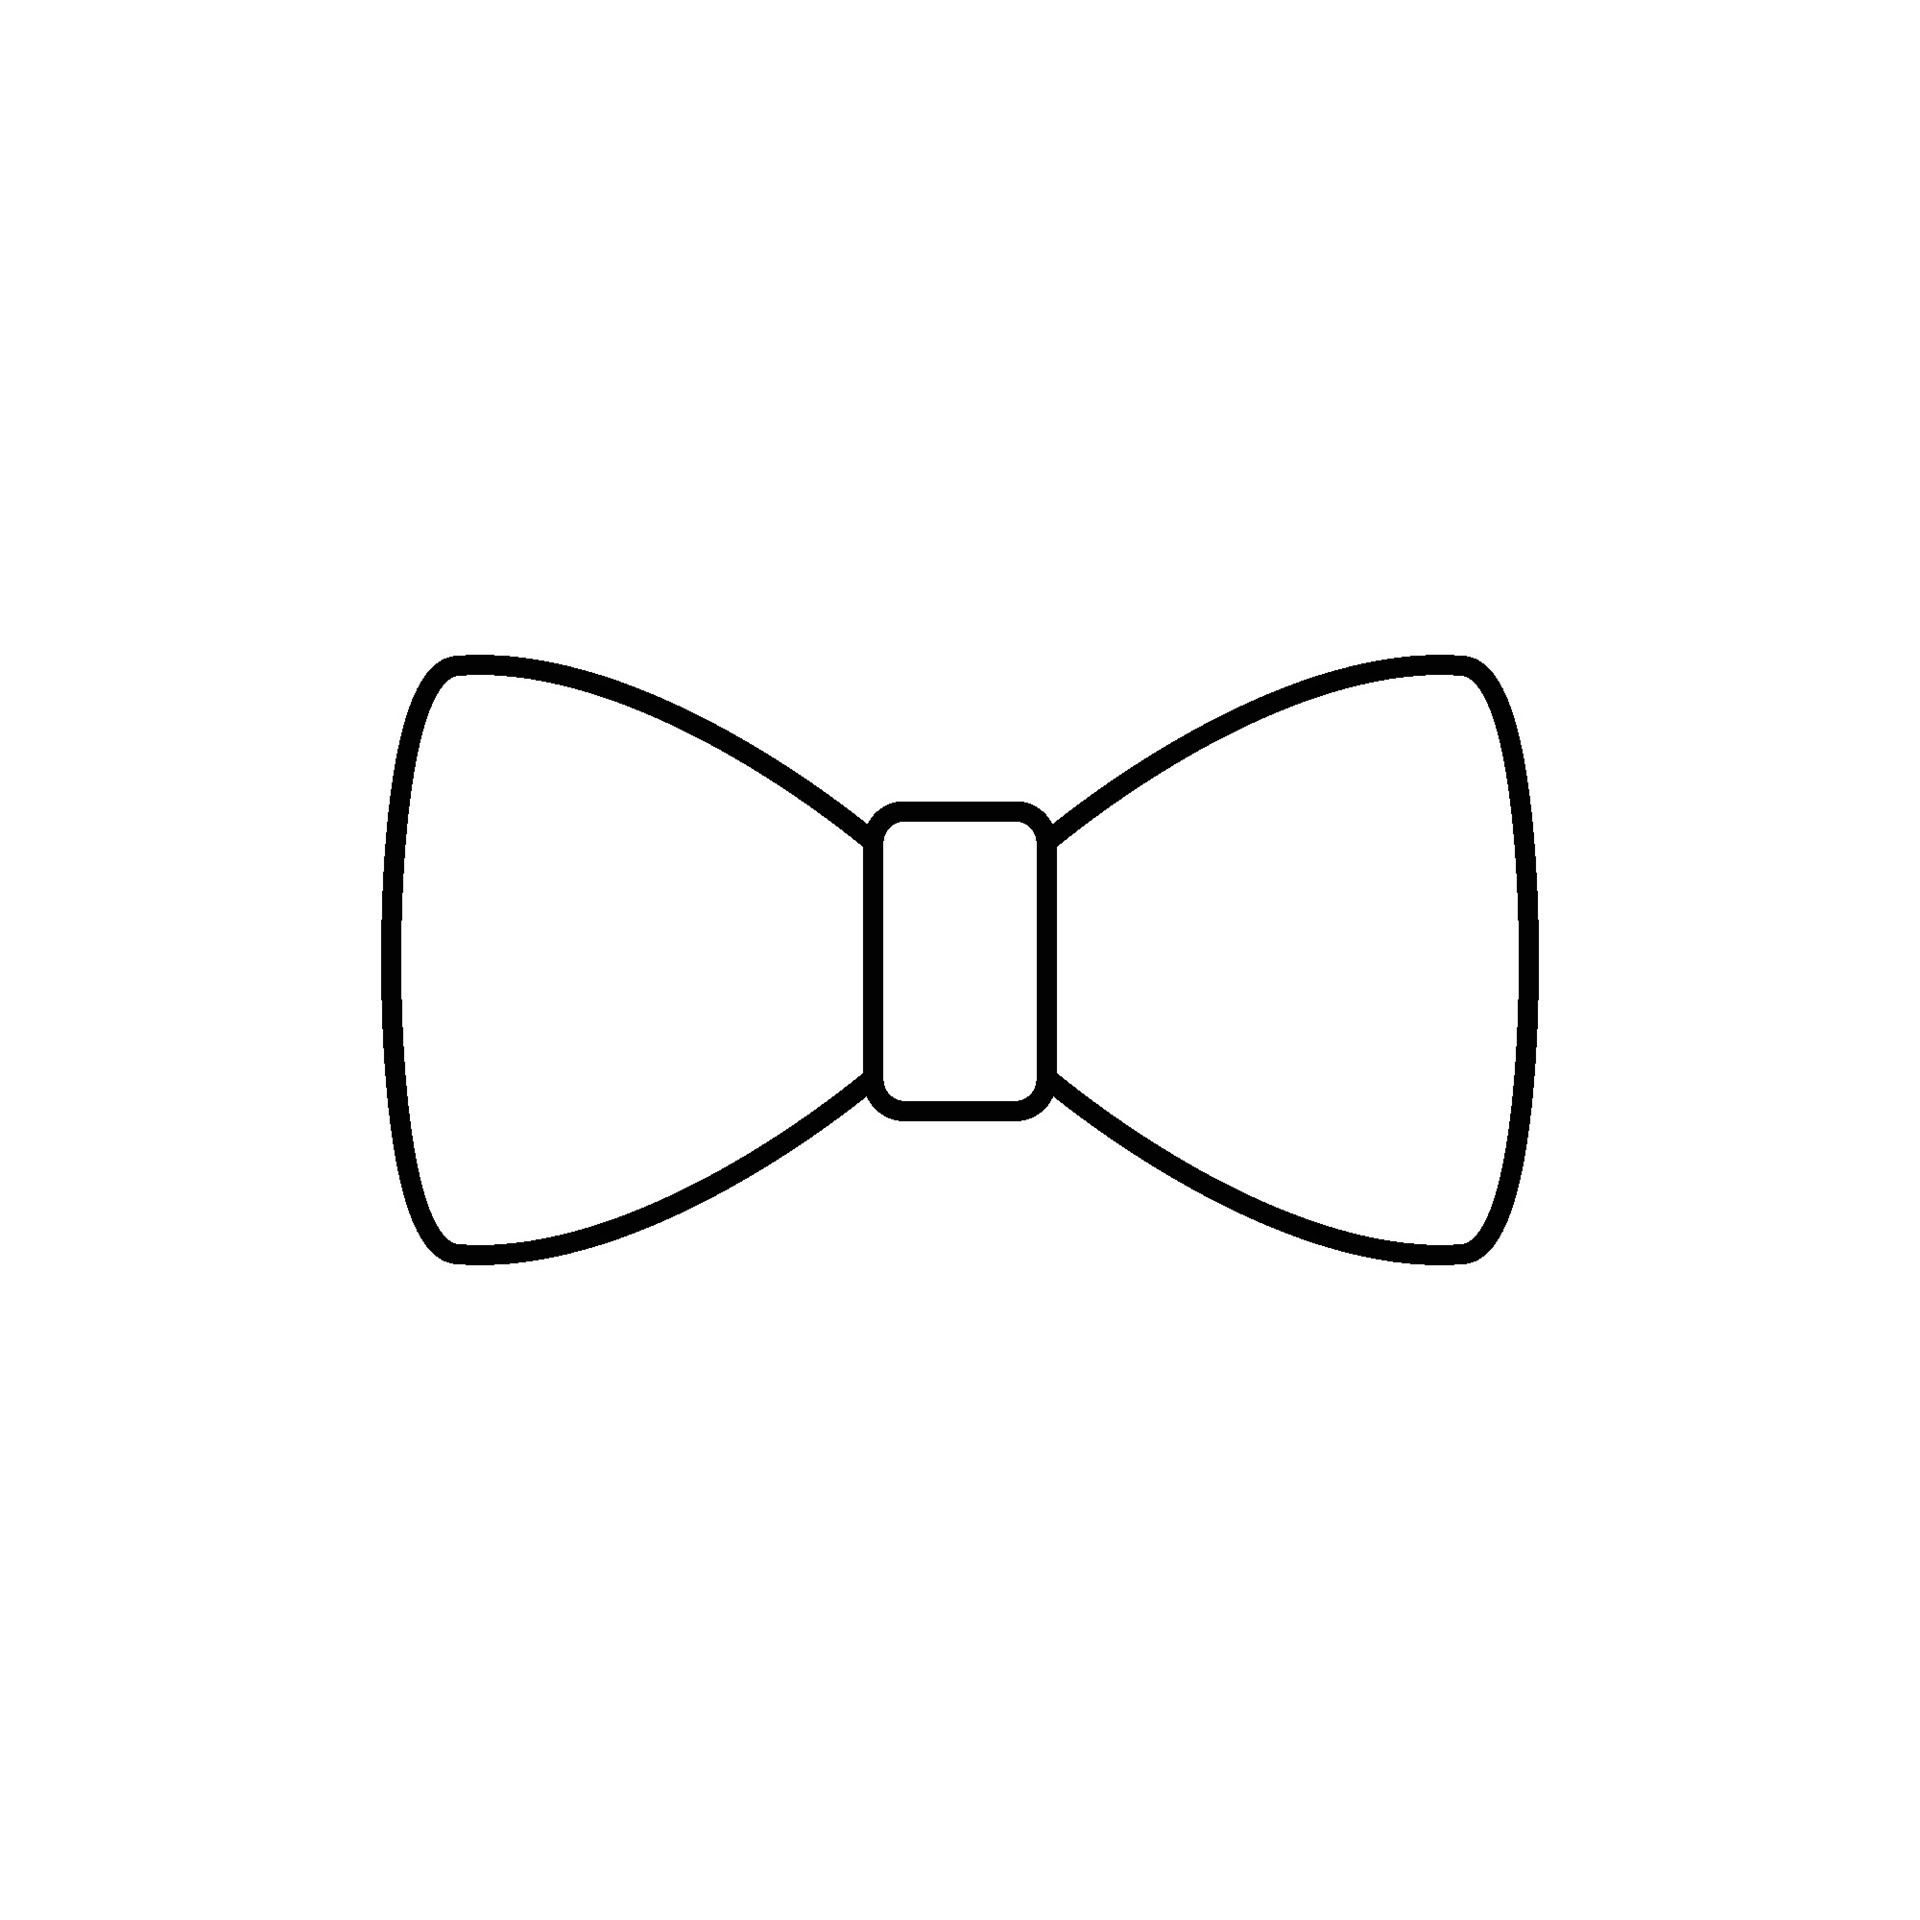 bow tie shape vector illustration on white background. 26379418 Vector ...